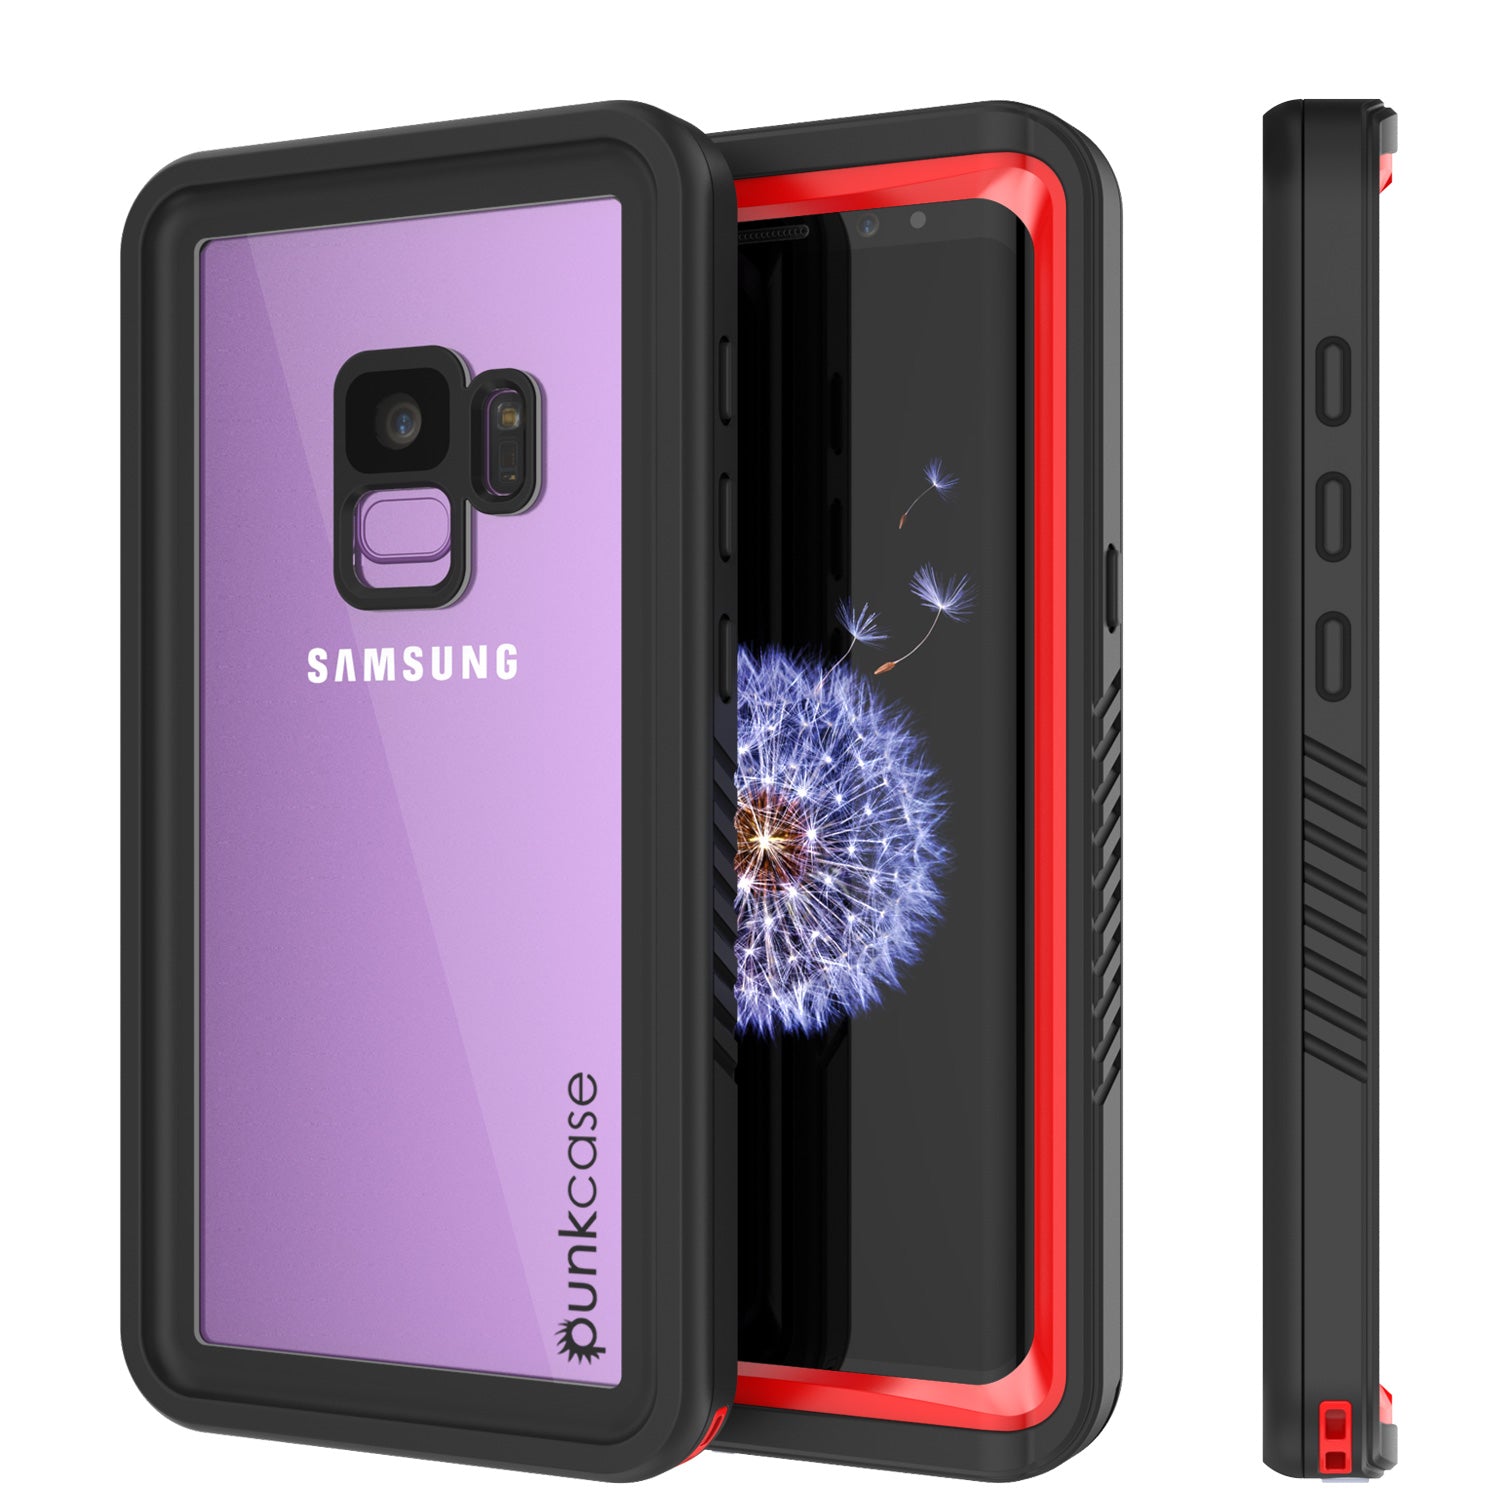 Galaxy S9 PLUS Waterproof Case, Punkcase [Extreme Series] [Slim Fit] [IP68 Certified] [Shockproof] [Snowproof] [Dirproof] Armor Cover W/ Built In Screen Protector for Samsung Galaxy S9+ [Red]